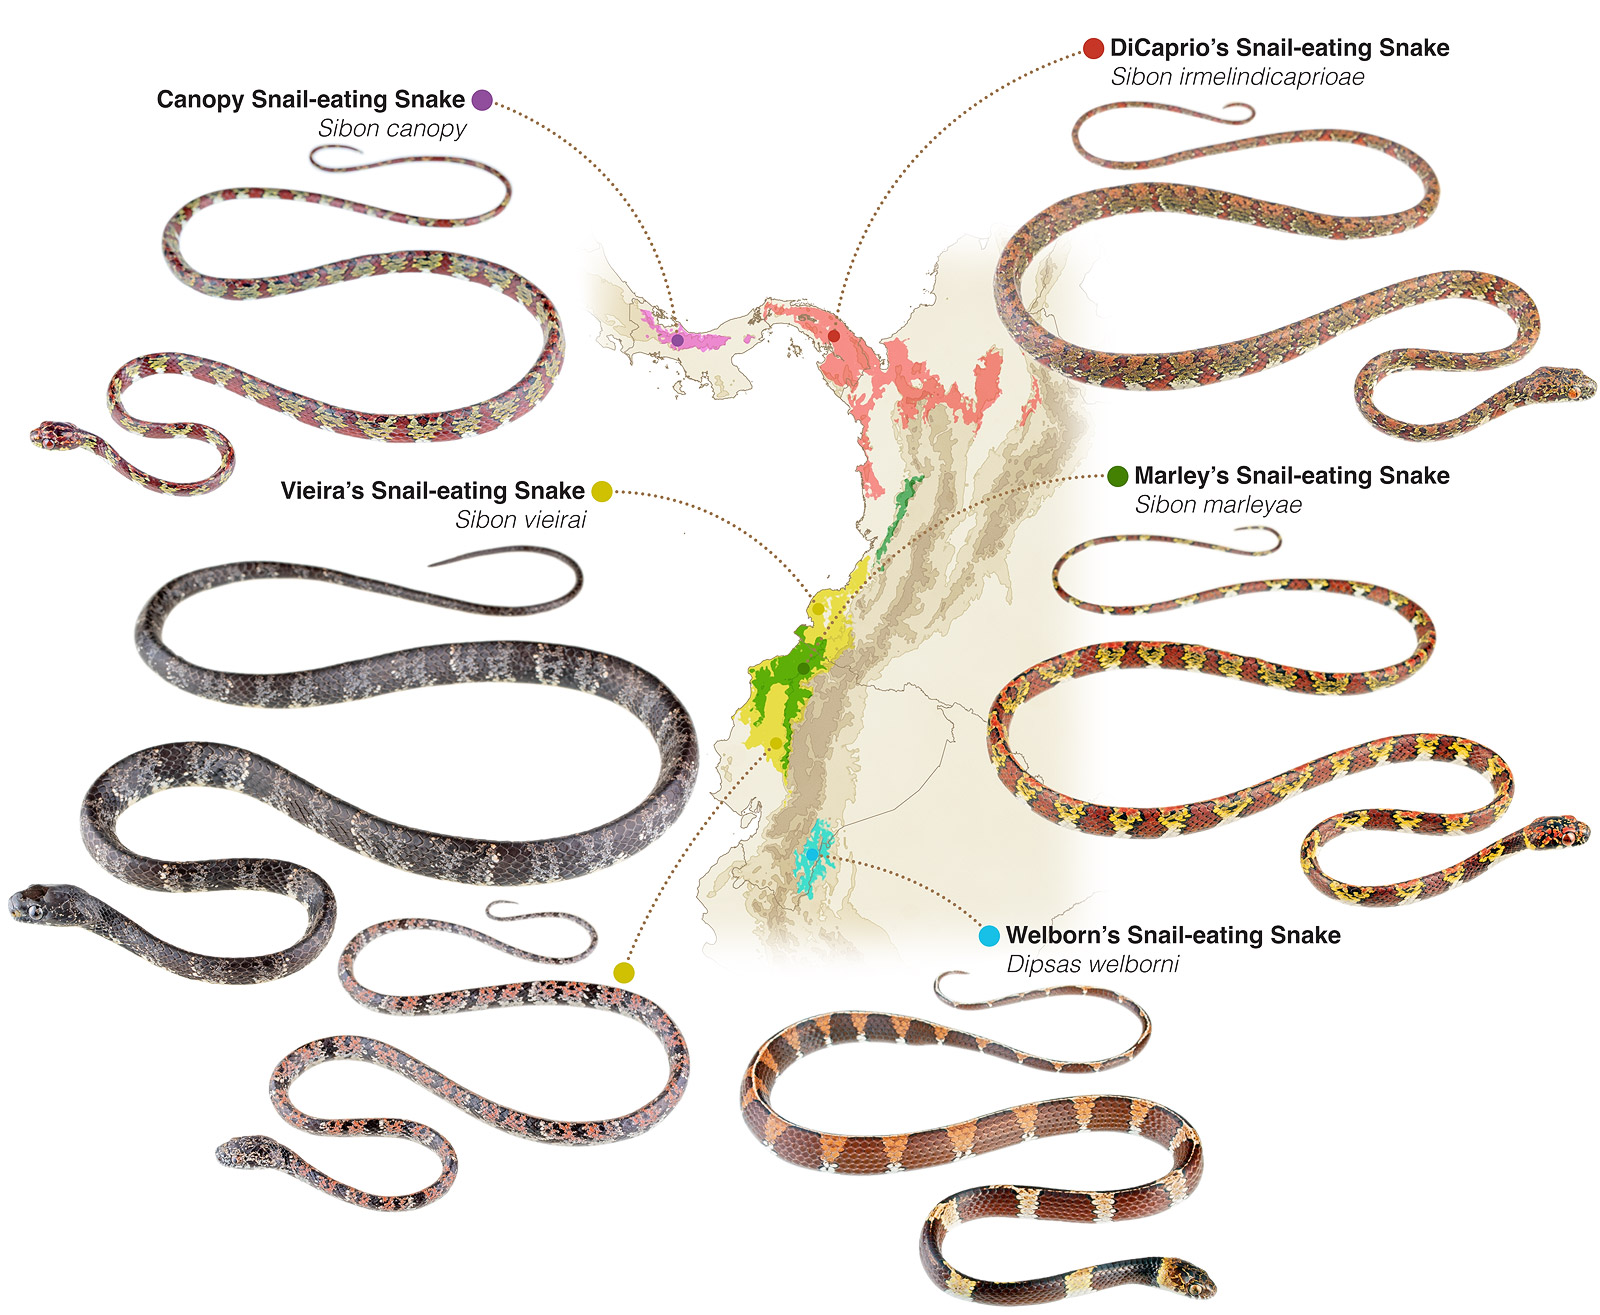 Figure showing the distribution of the new species of snakes